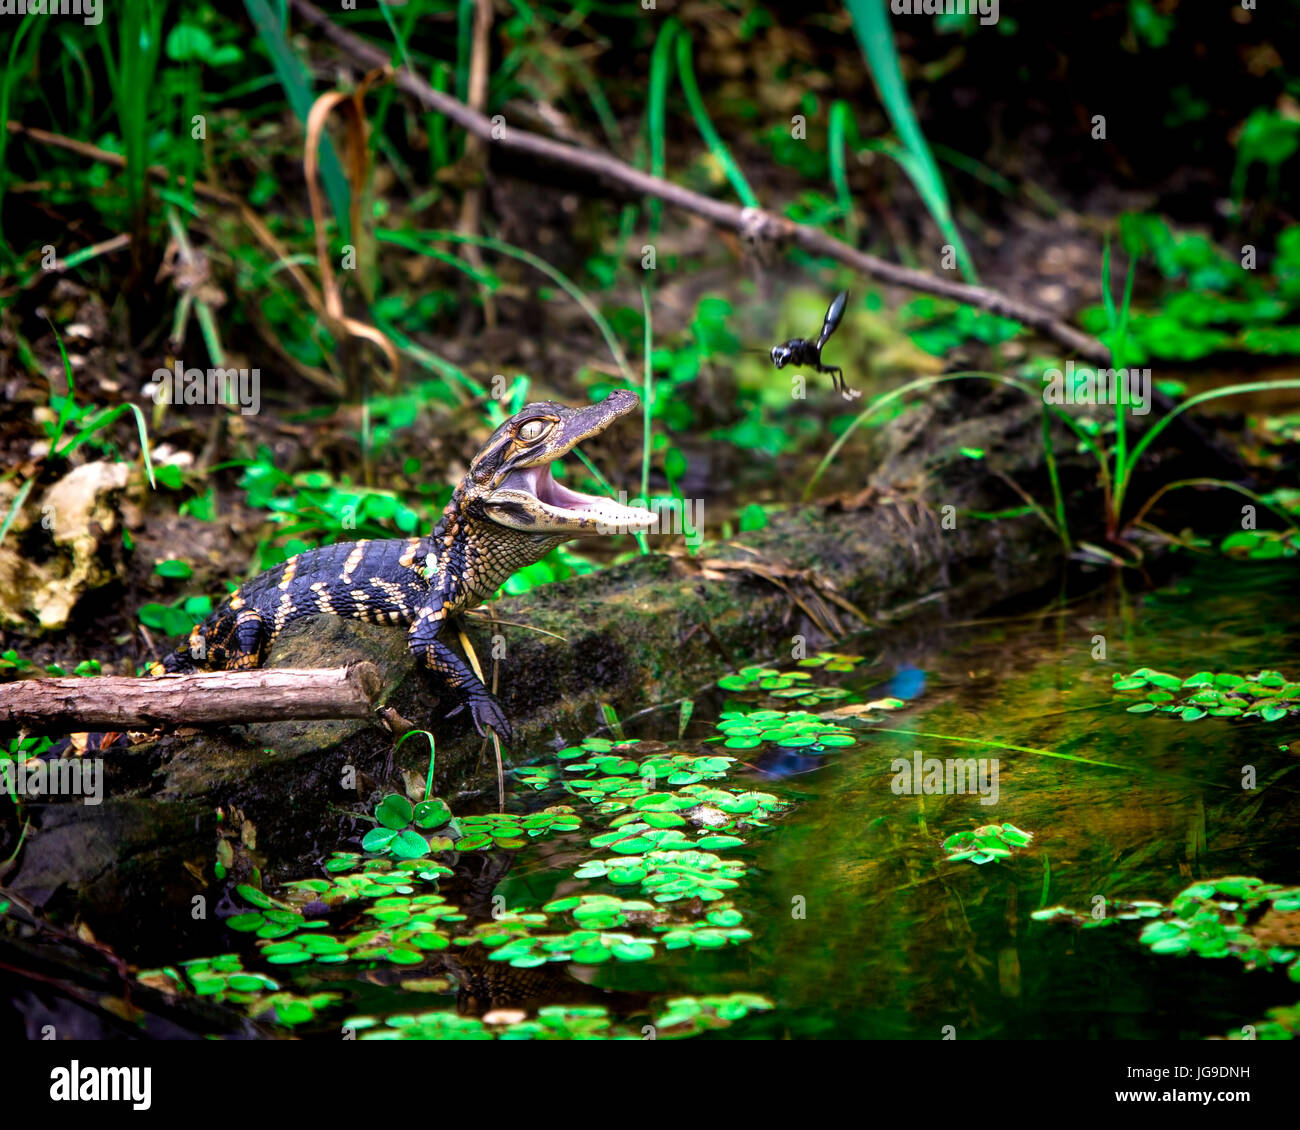 A slightly annoyed baby alligator snaps at mud wasps flying around it's head. Photographed in the Florida Everglades. Stock Photo